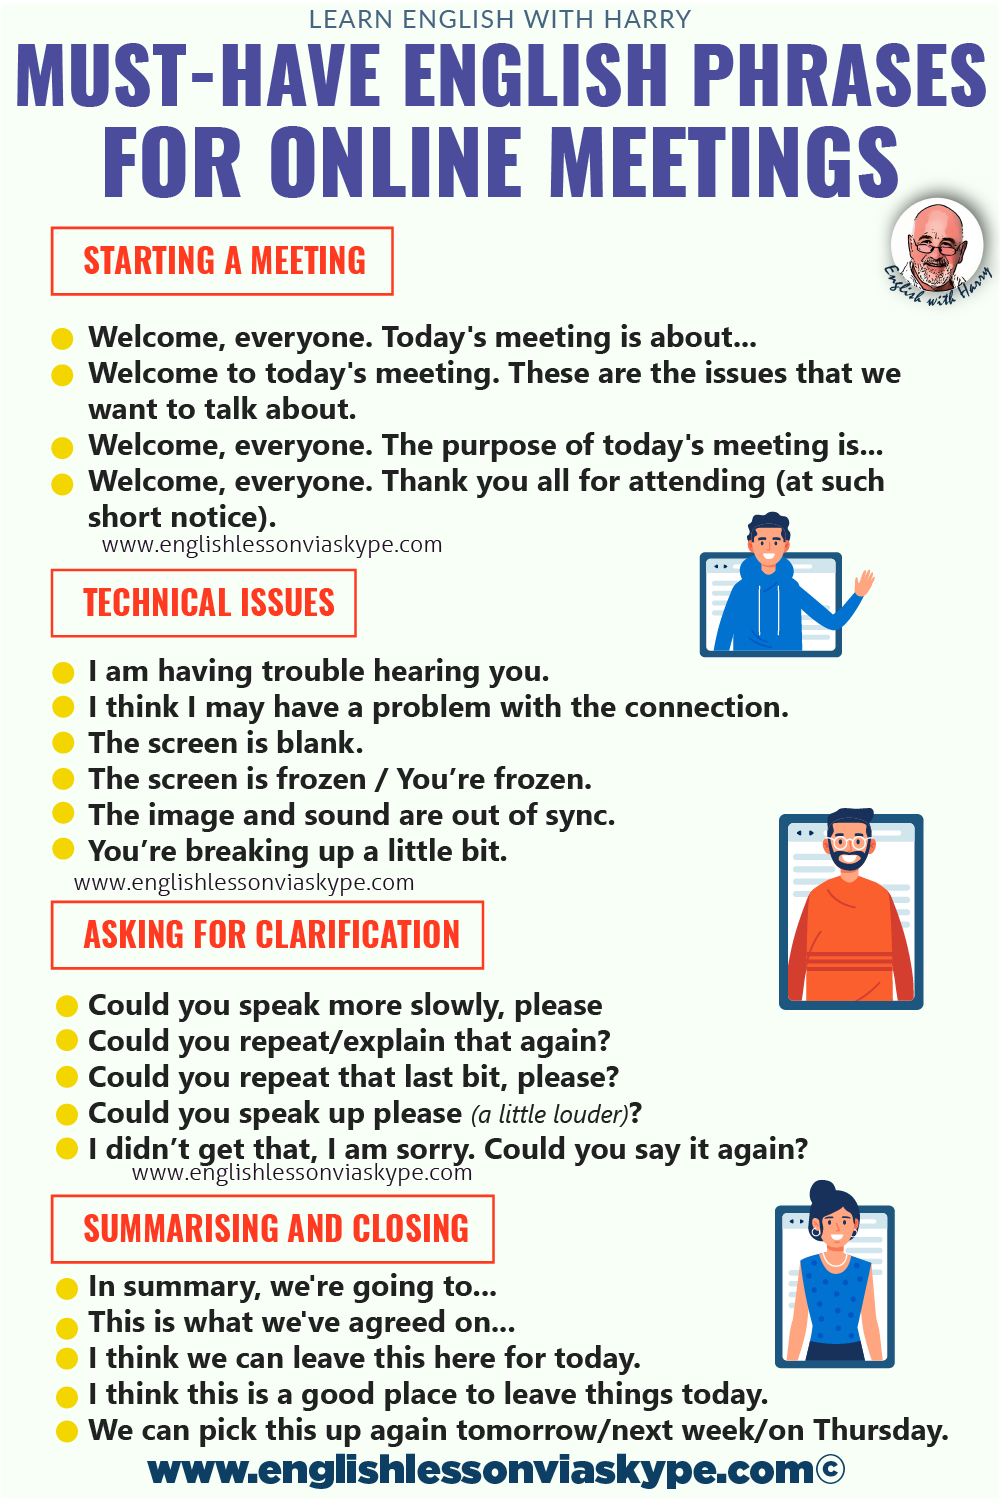 Must-have English phrases for online meetings. Professional English learning. Online English lessons on Zoom at www.englishlessonviaskype.com #learnenglish #englishlessons #EnglishTeacher #vocabulary #ingles #อังกฤษ #английский #aprenderingles #english #cursodeingles #учианглийский #vocabulário #dicasdeingles #learningenglish #ingilizce #englishgrammar #englishvocabulary #ielts #idiomas